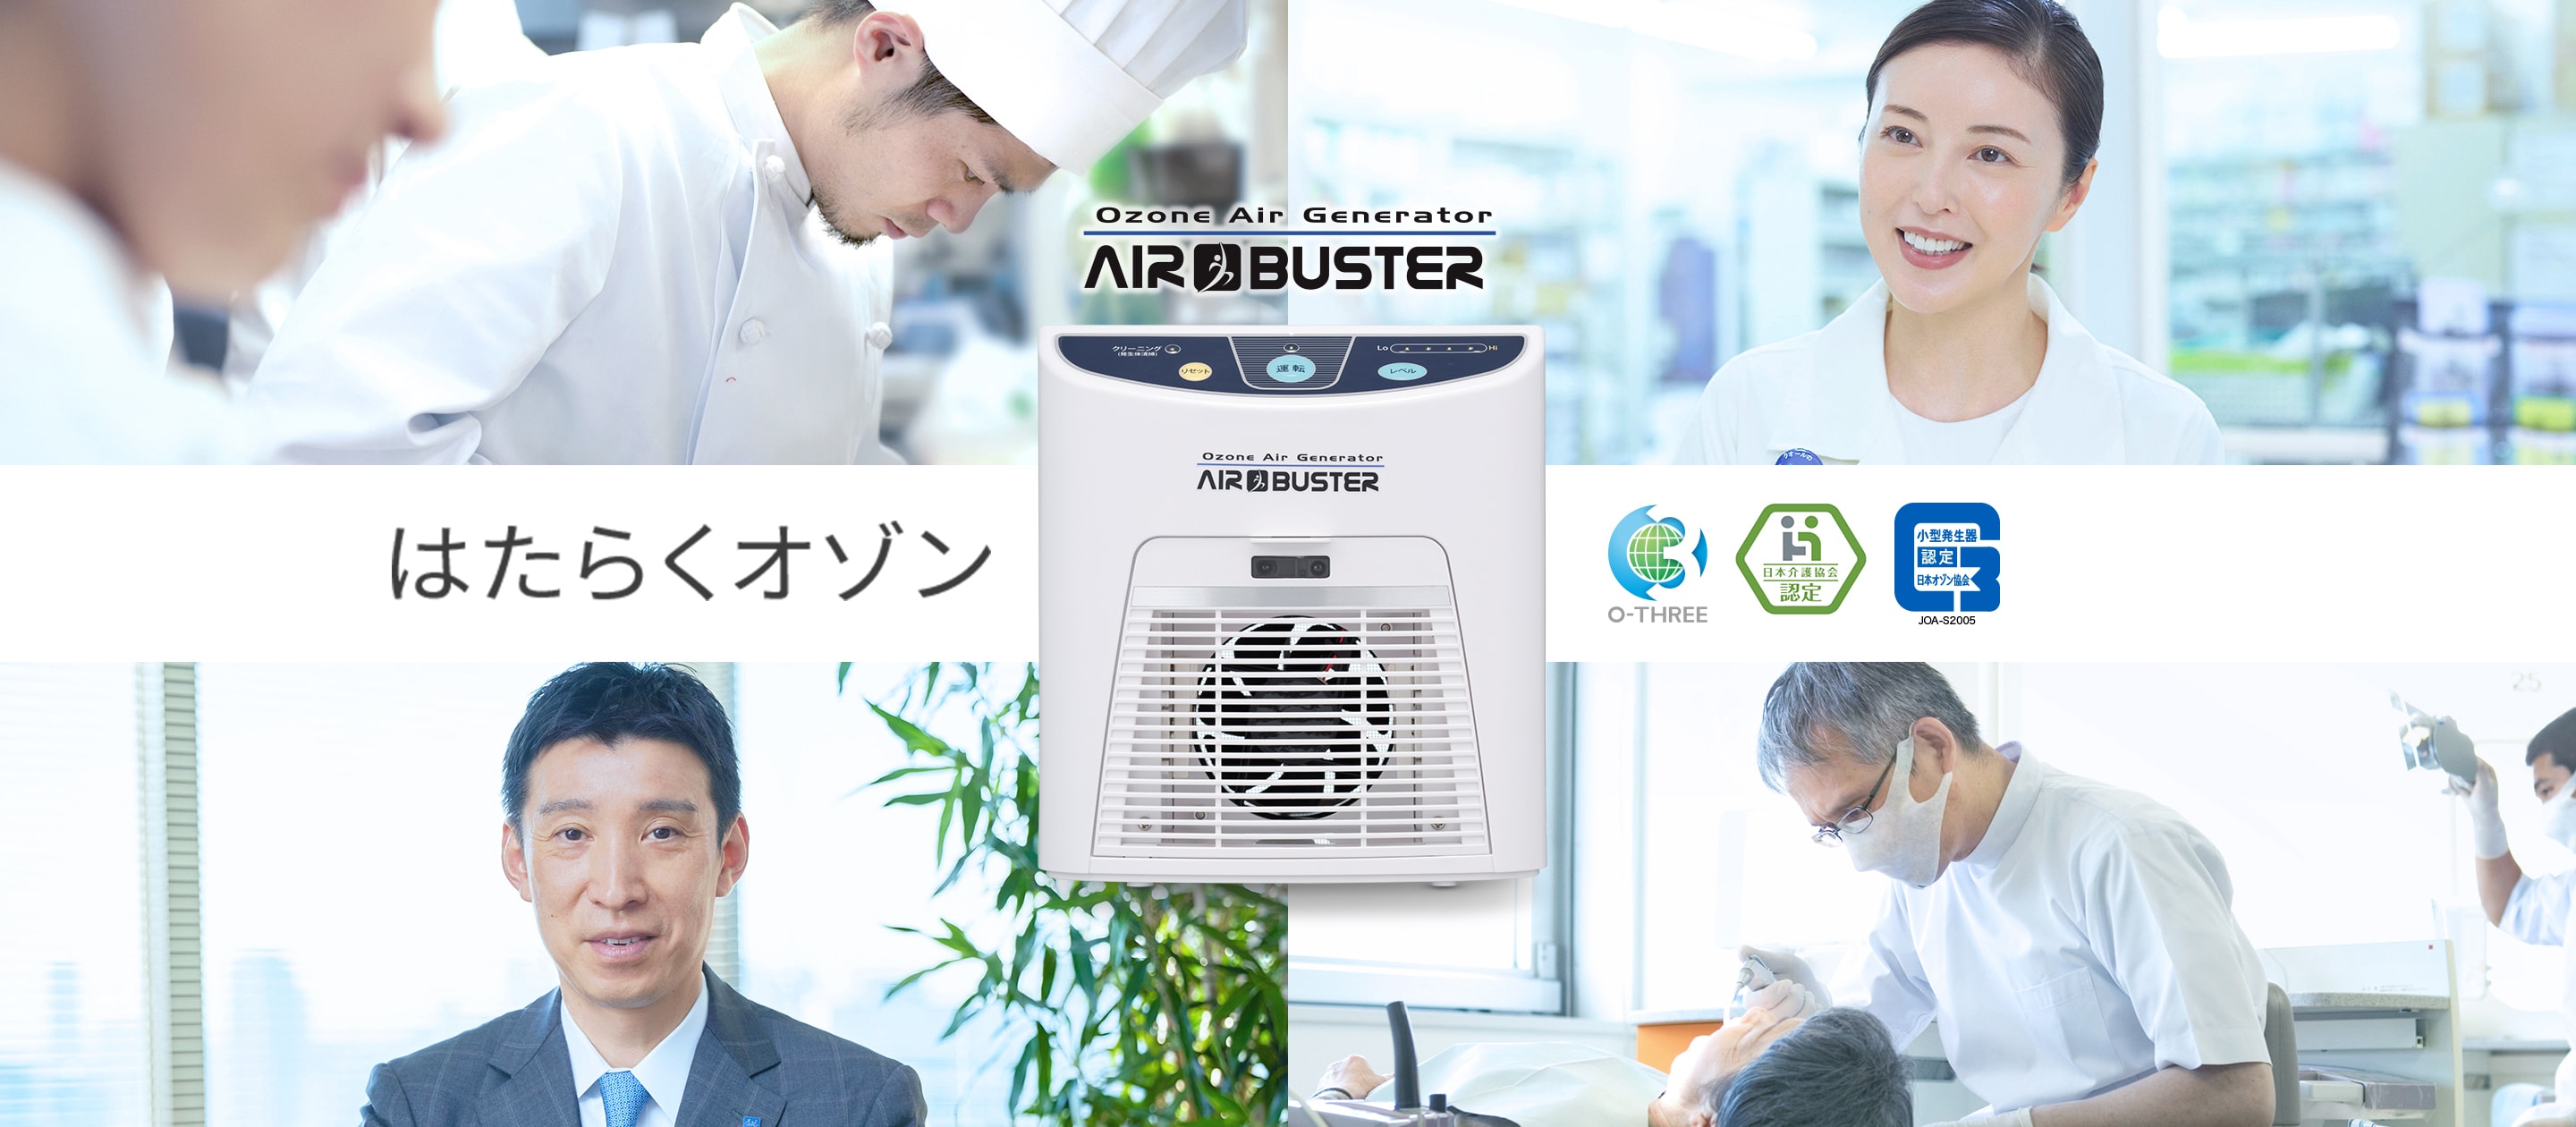 Ozone Air Generator AIR BUSTER はたらくオゾン